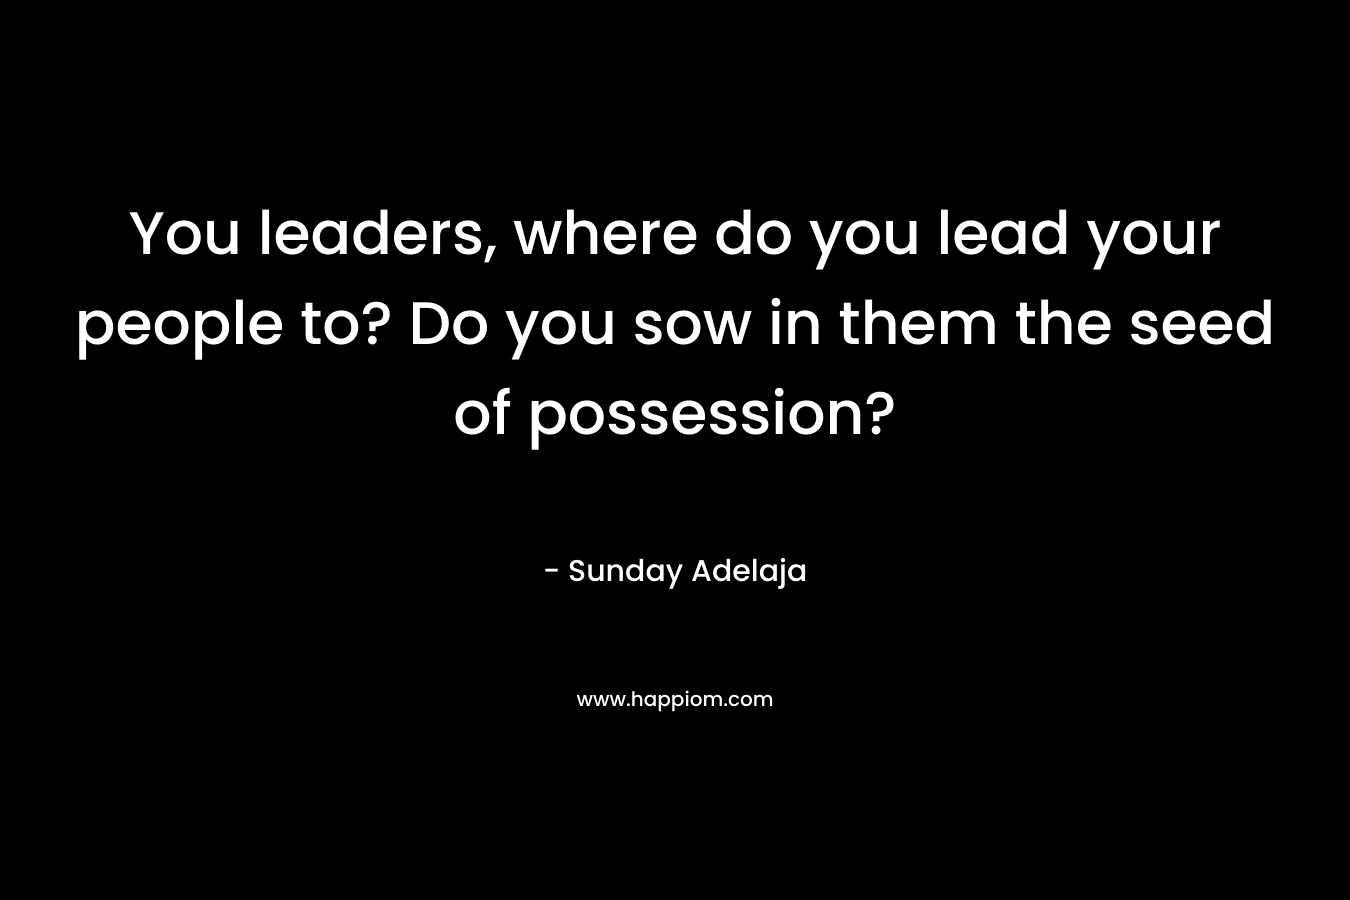 You leaders, where do you lead your people to? Do you sow in them the seed of possession?